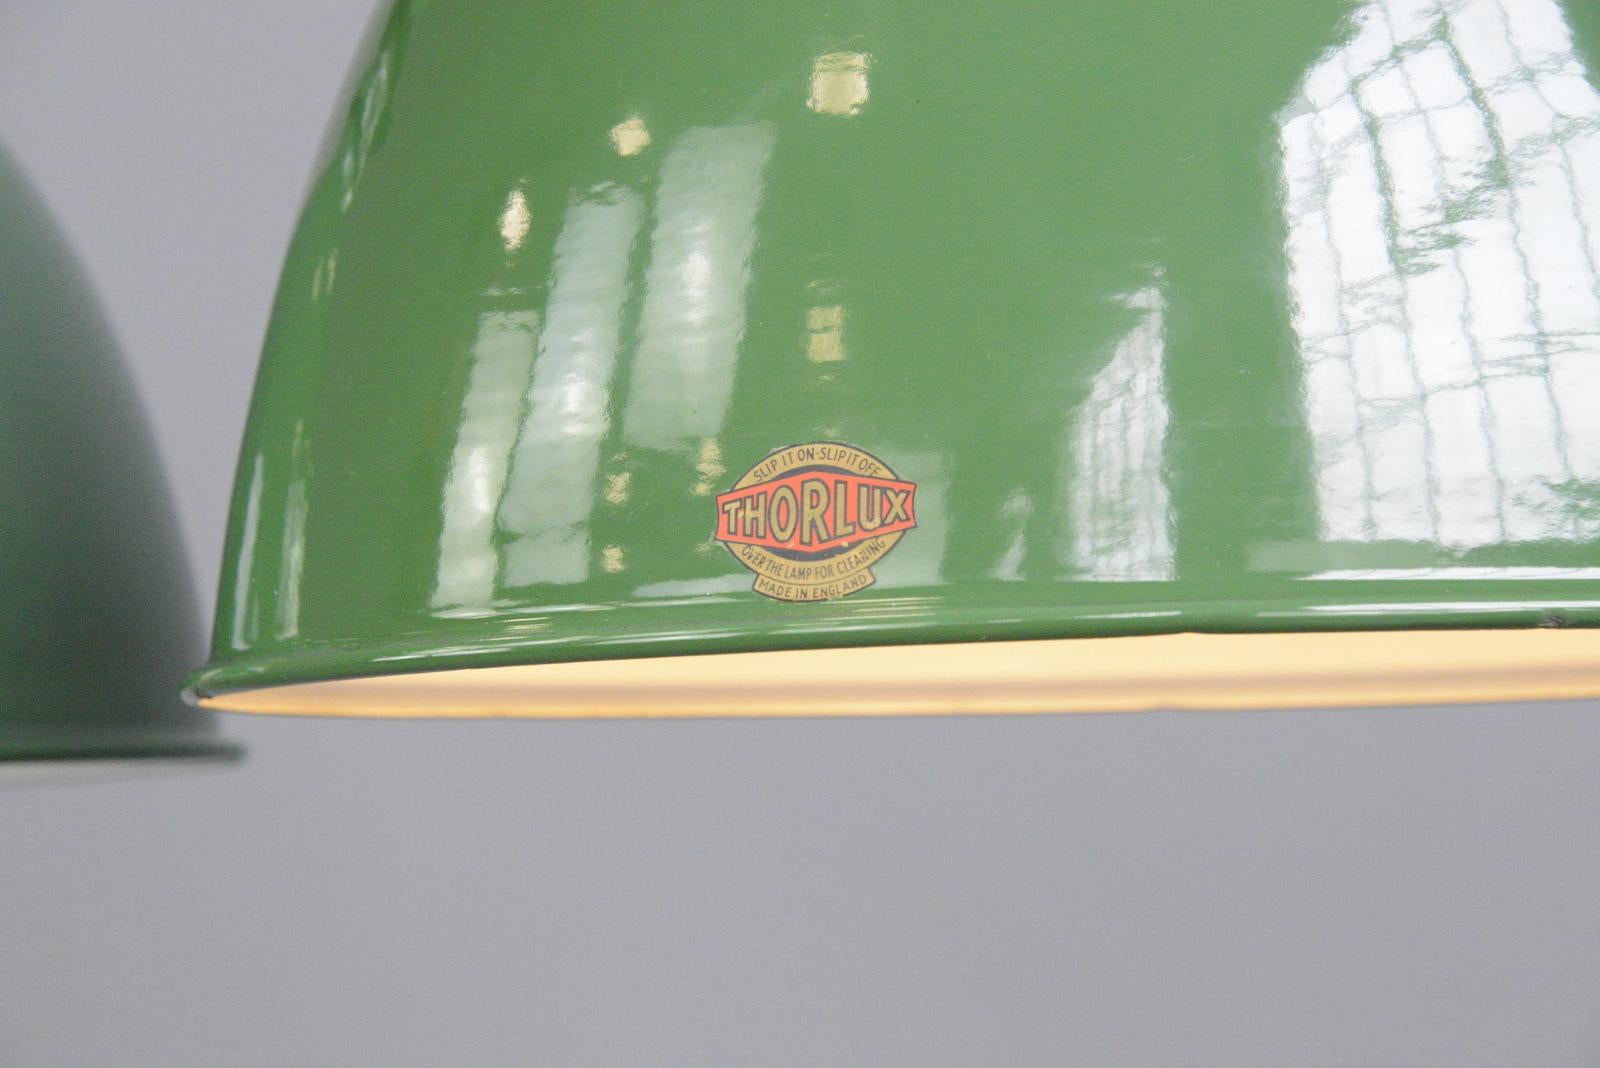 Rolls Royce factory pendant lights by Thorlux, circa 1950s

- Price is per light
- Vitreous green enamel shades
- White enamel inner reflectors
- Twist off tops
- Takes E27 fitting bulbs
- Comes with 100cm of red twist cable
- Comes with